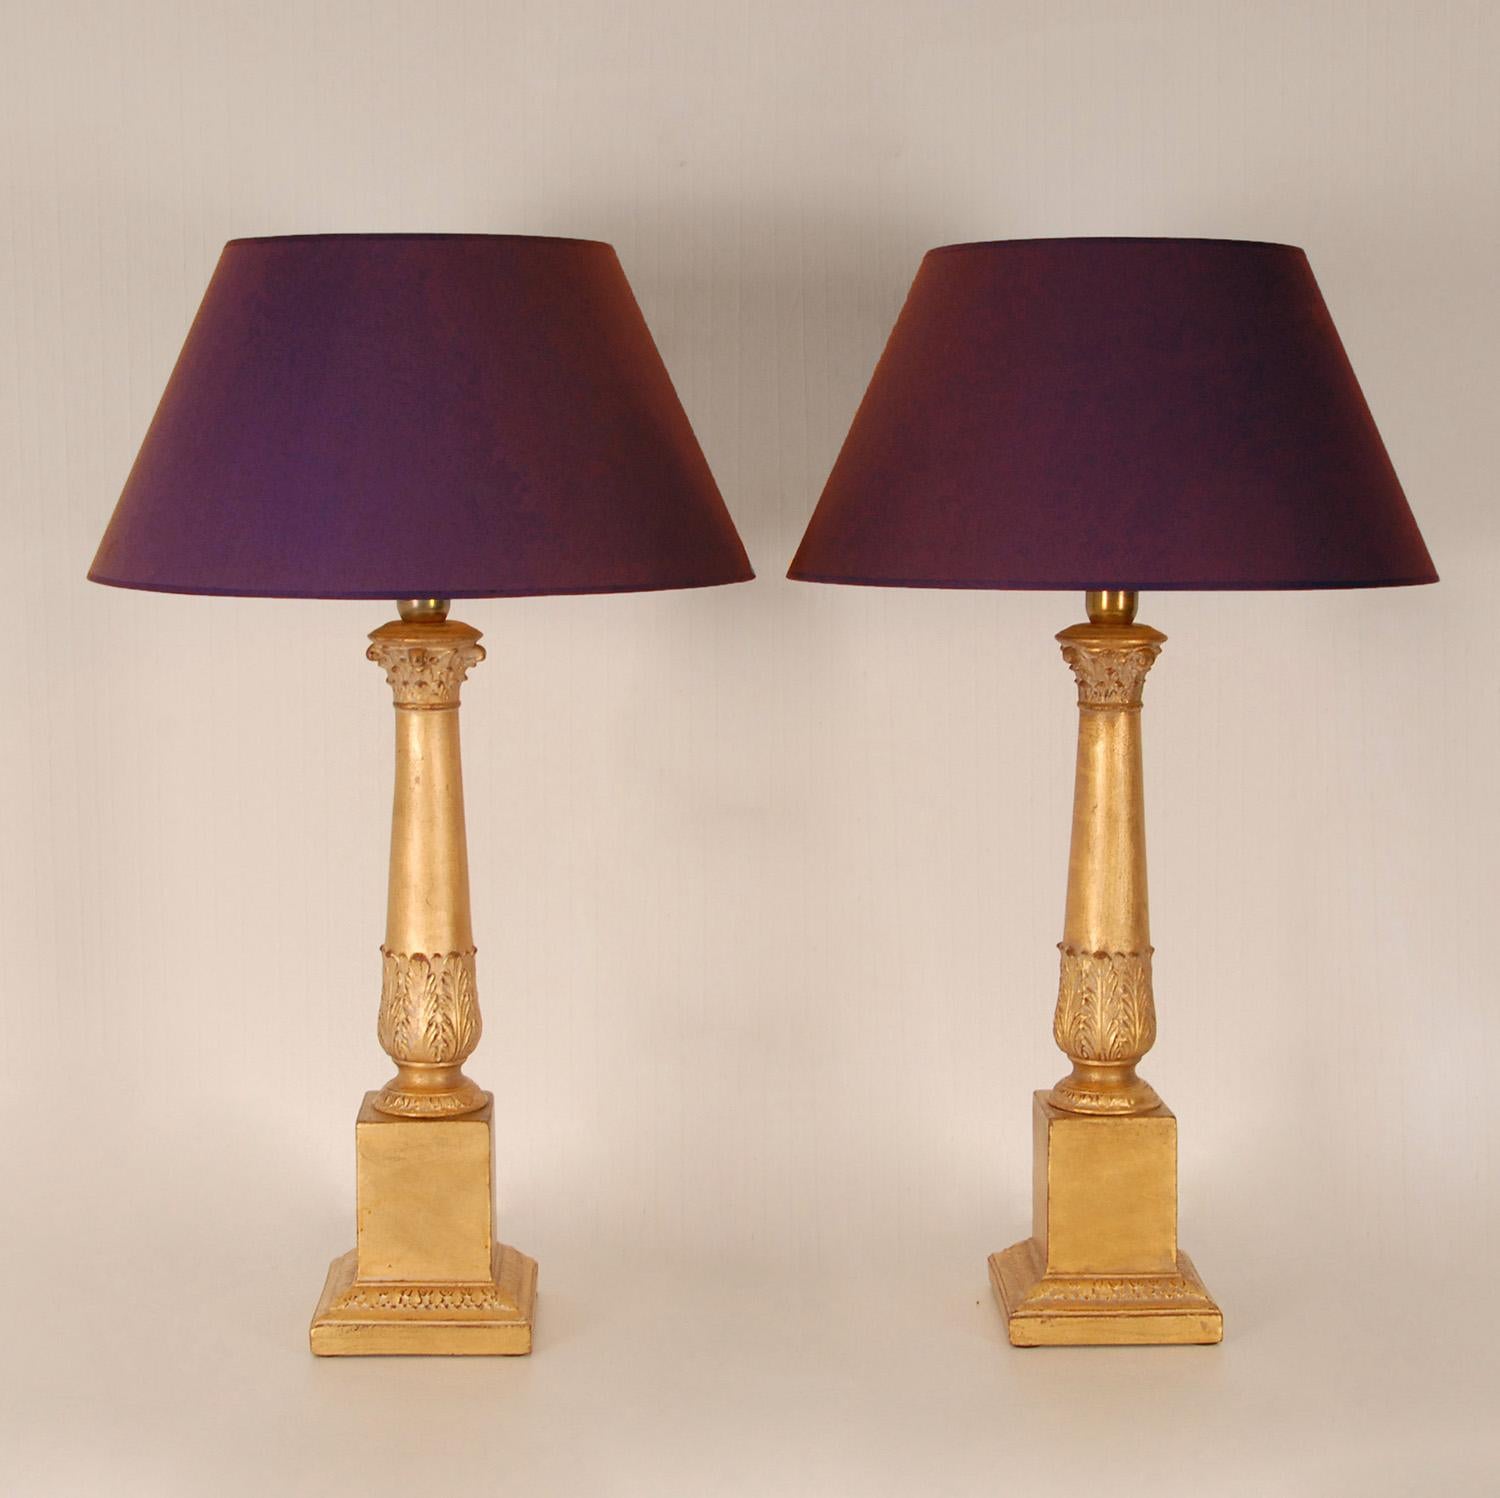 Vintage Italian Ceramic Lamps Gold Gilded Corinthian Column Table Lamps a Pair For Sale 4